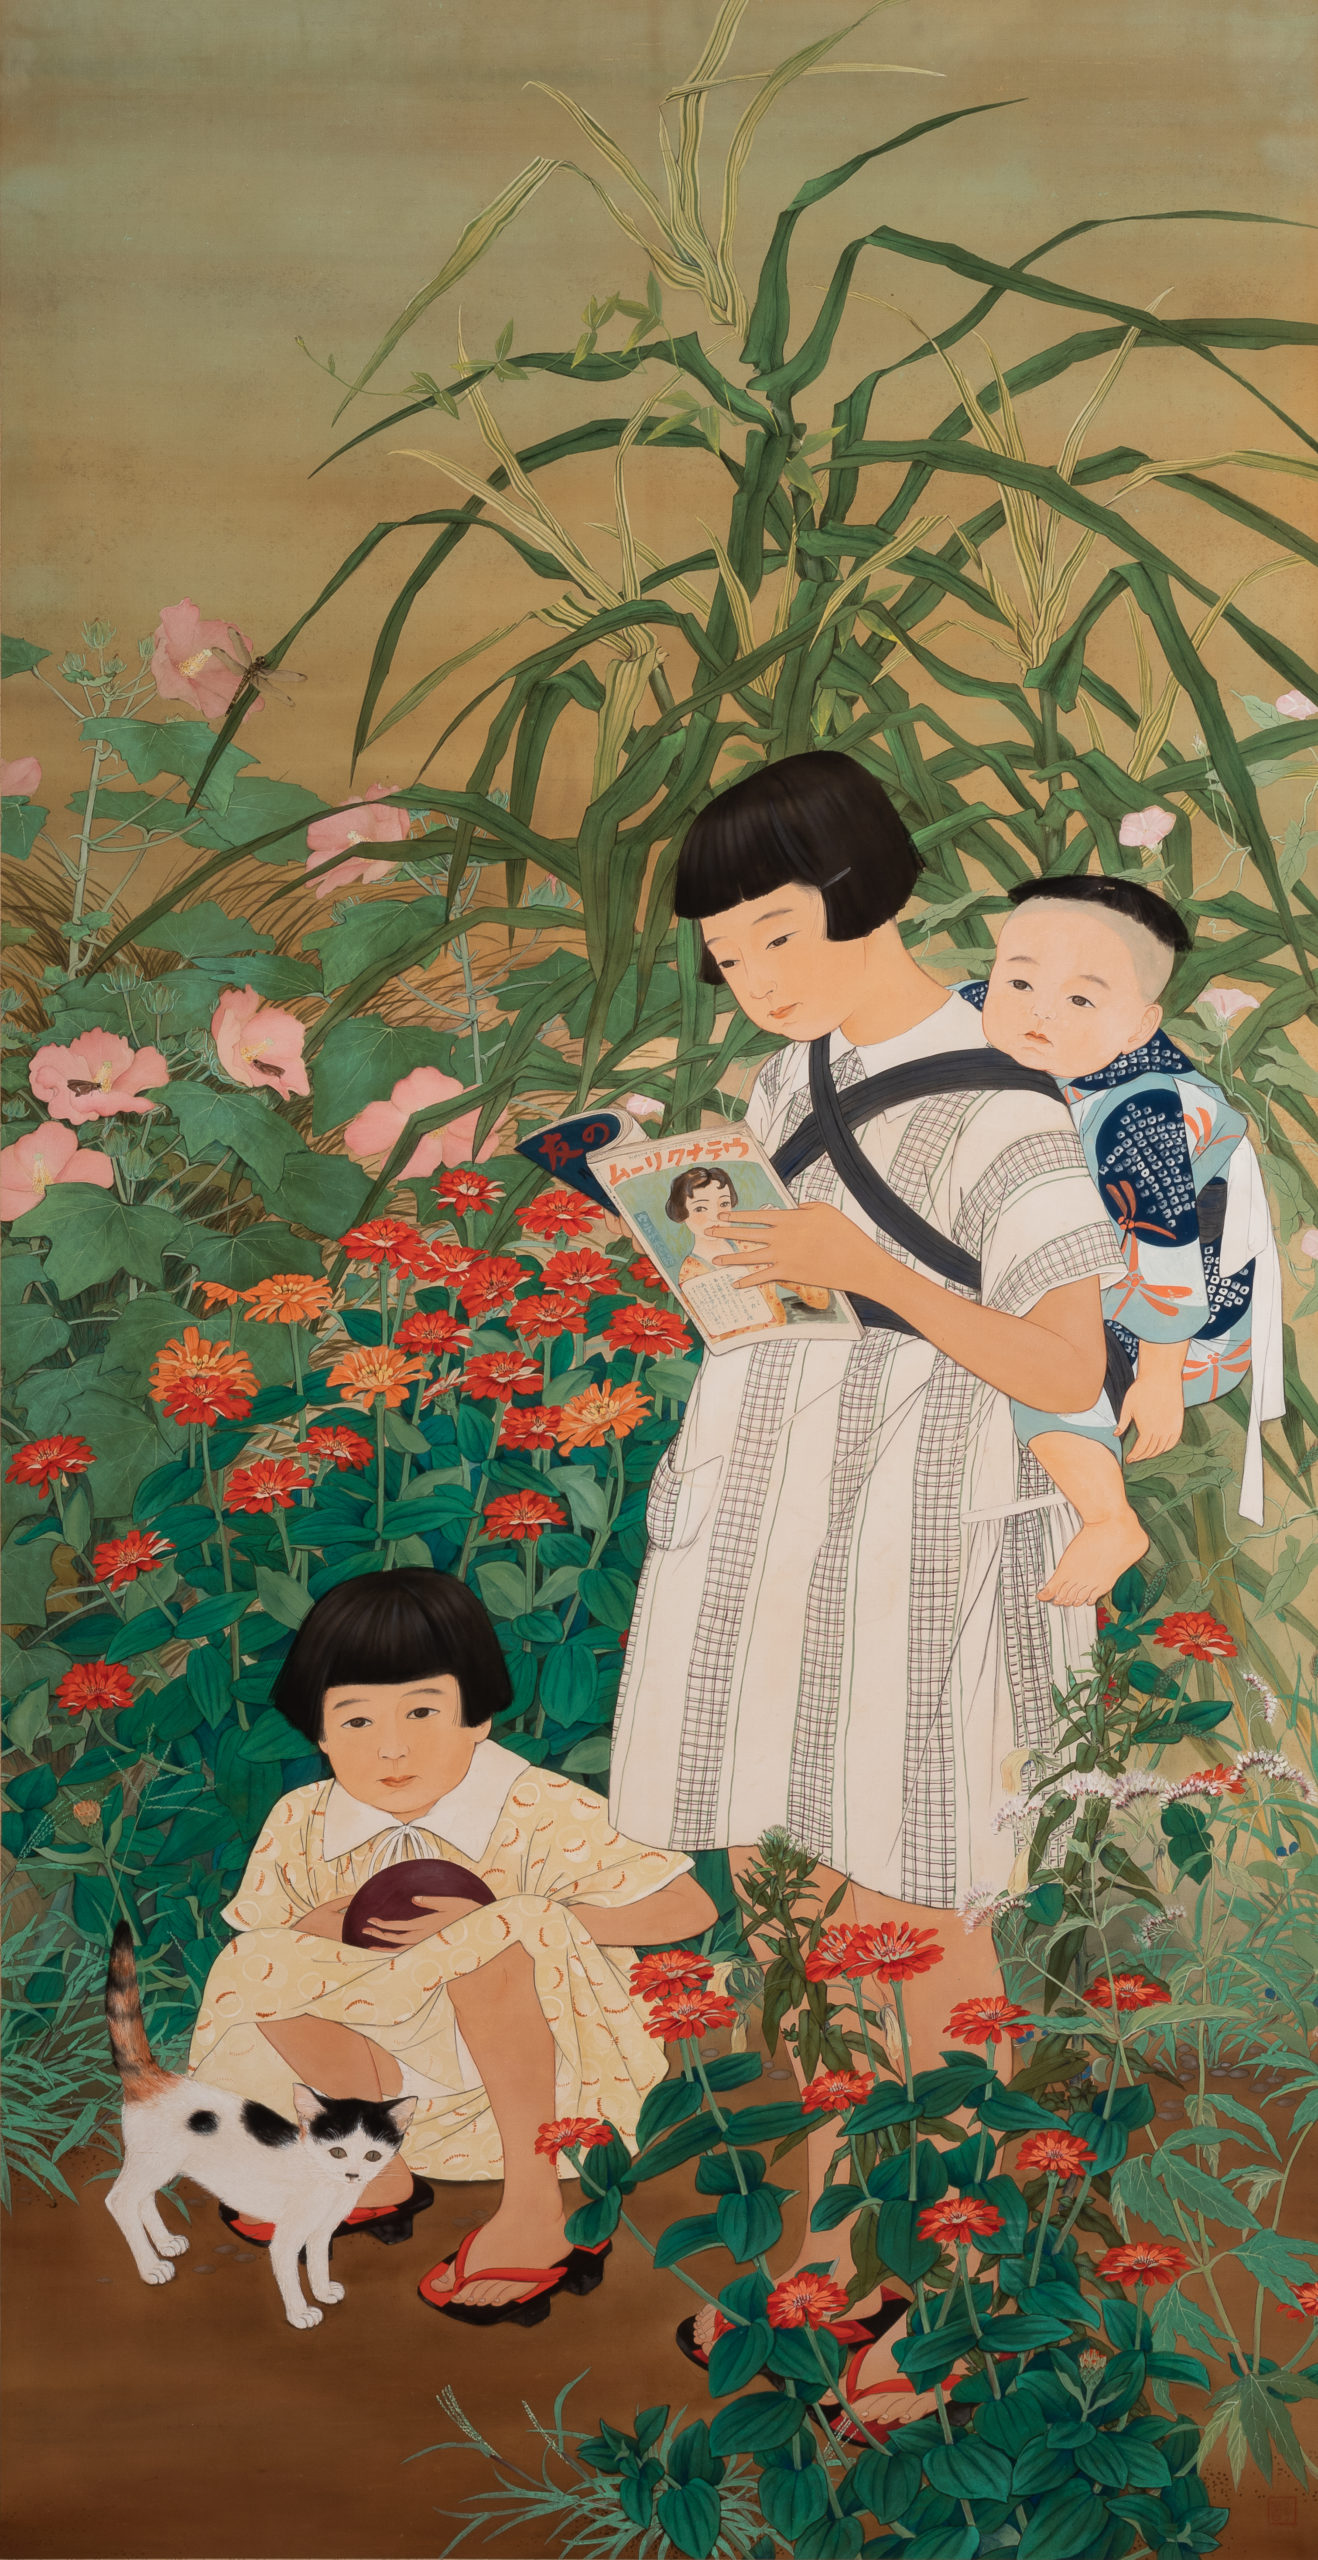 a young girl playing with a cat crouches in among flower bushes and greenery while another girl stands with a baby on her back